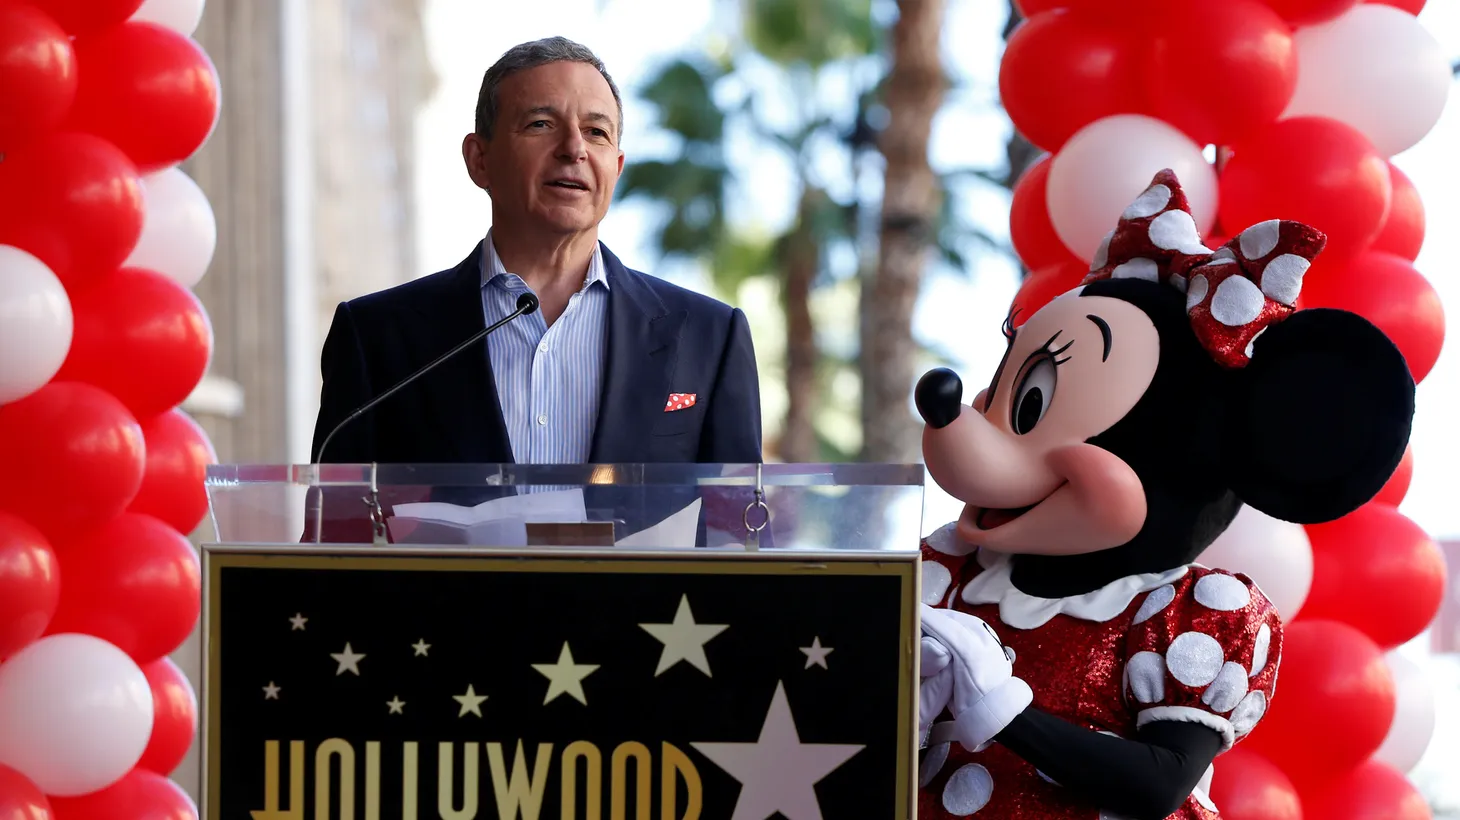 Chairman and CEO of The Walt Disney Company Bob Iger speaks next to the character of Minnie Mouse at the unveiling of her star on the Hollywood Walk of Fame in Los Angeles, California, U.S., January 22, 2018.